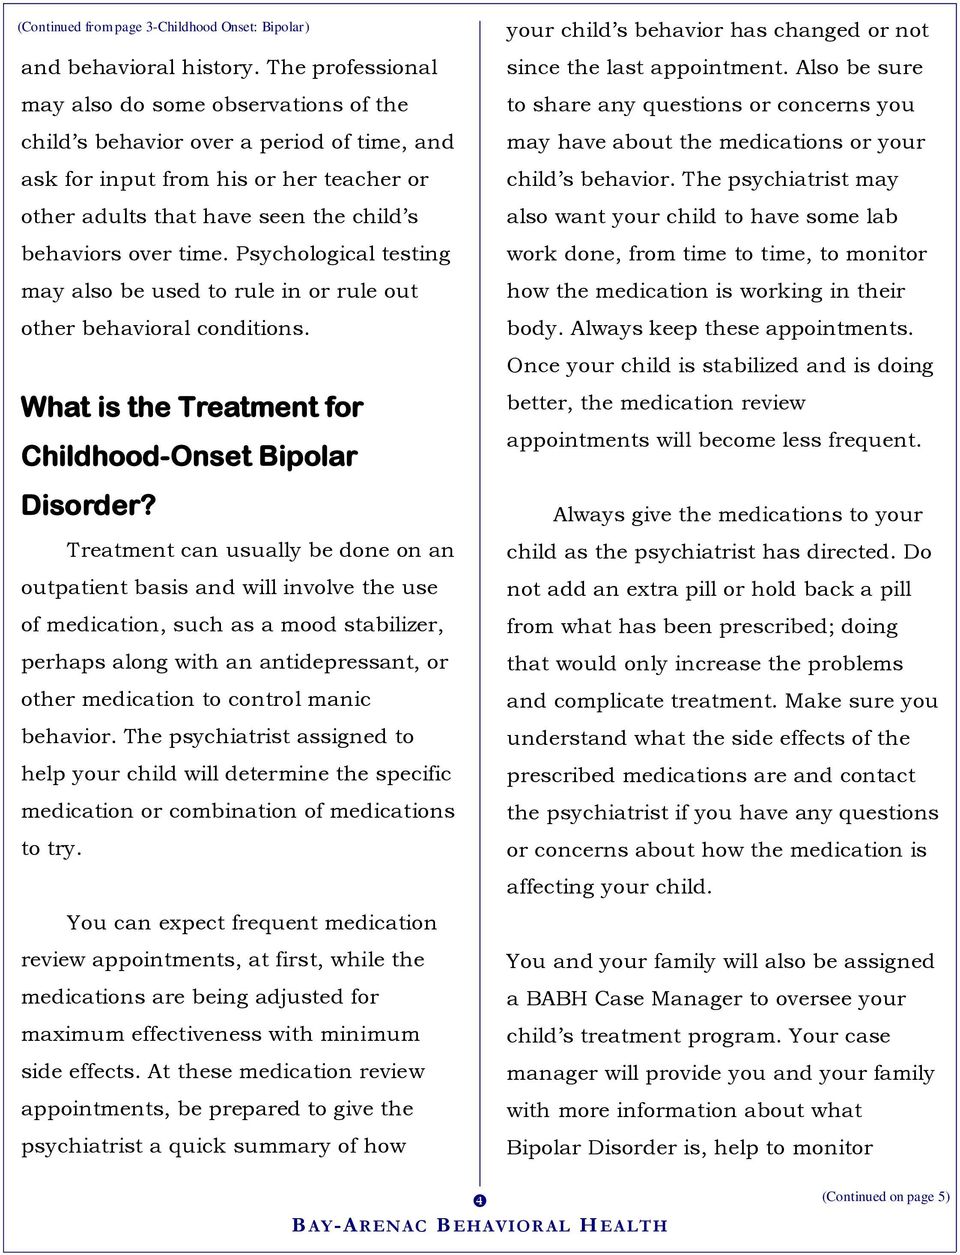 Psychological testing may also be used to rule in or rule out other behavioral conditions. What is the Treatment for Childhood-Onset Bipolar Disorder?